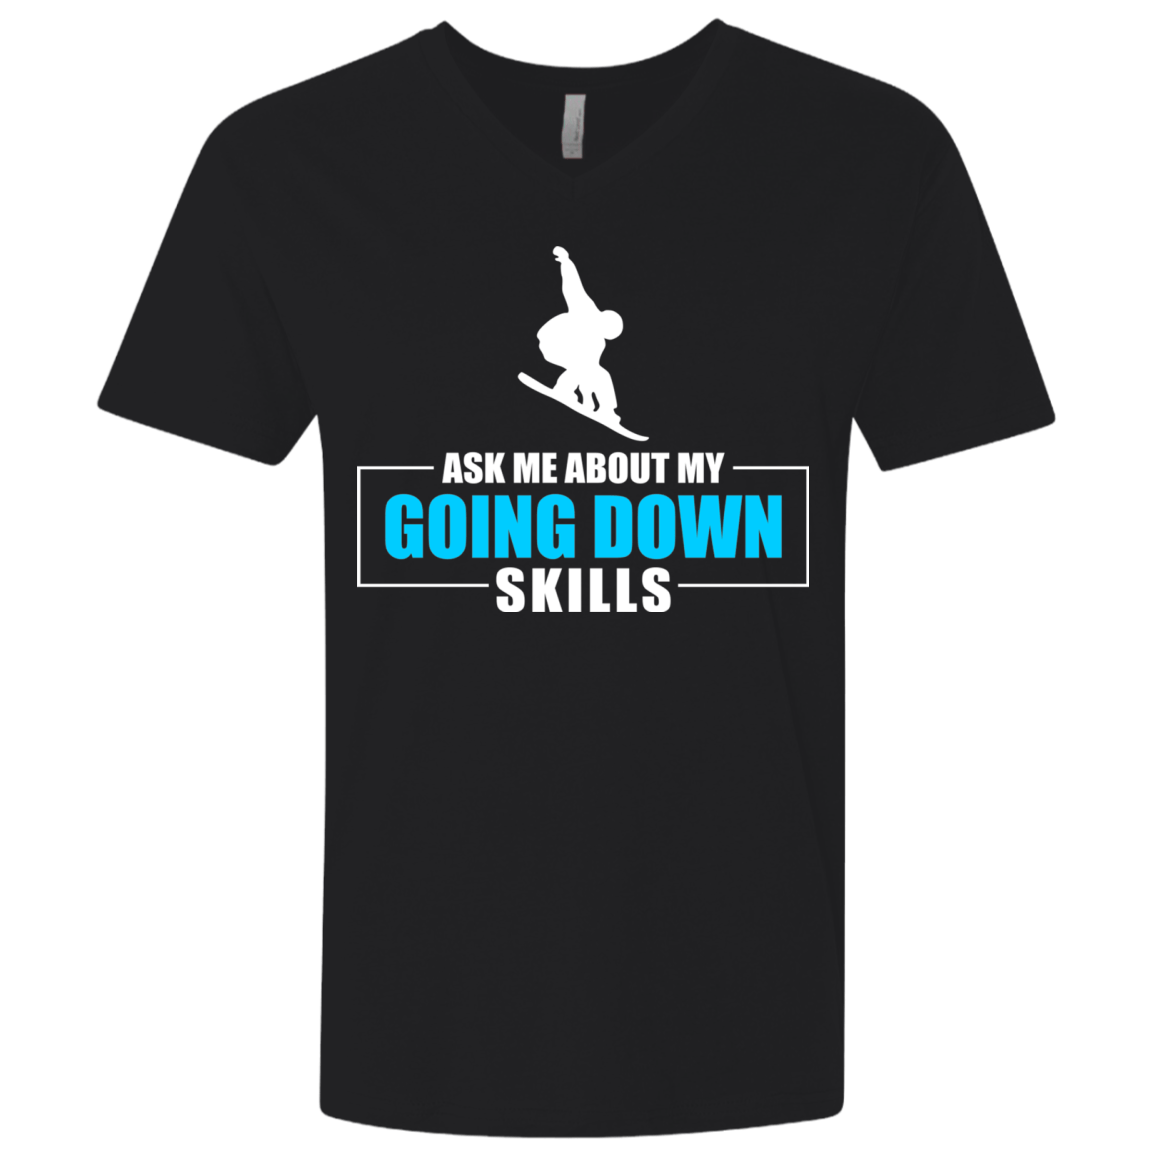 Ask Me About My Going Down Skills - Snowboard Men's Tees and V-Neck - Powderaddicts